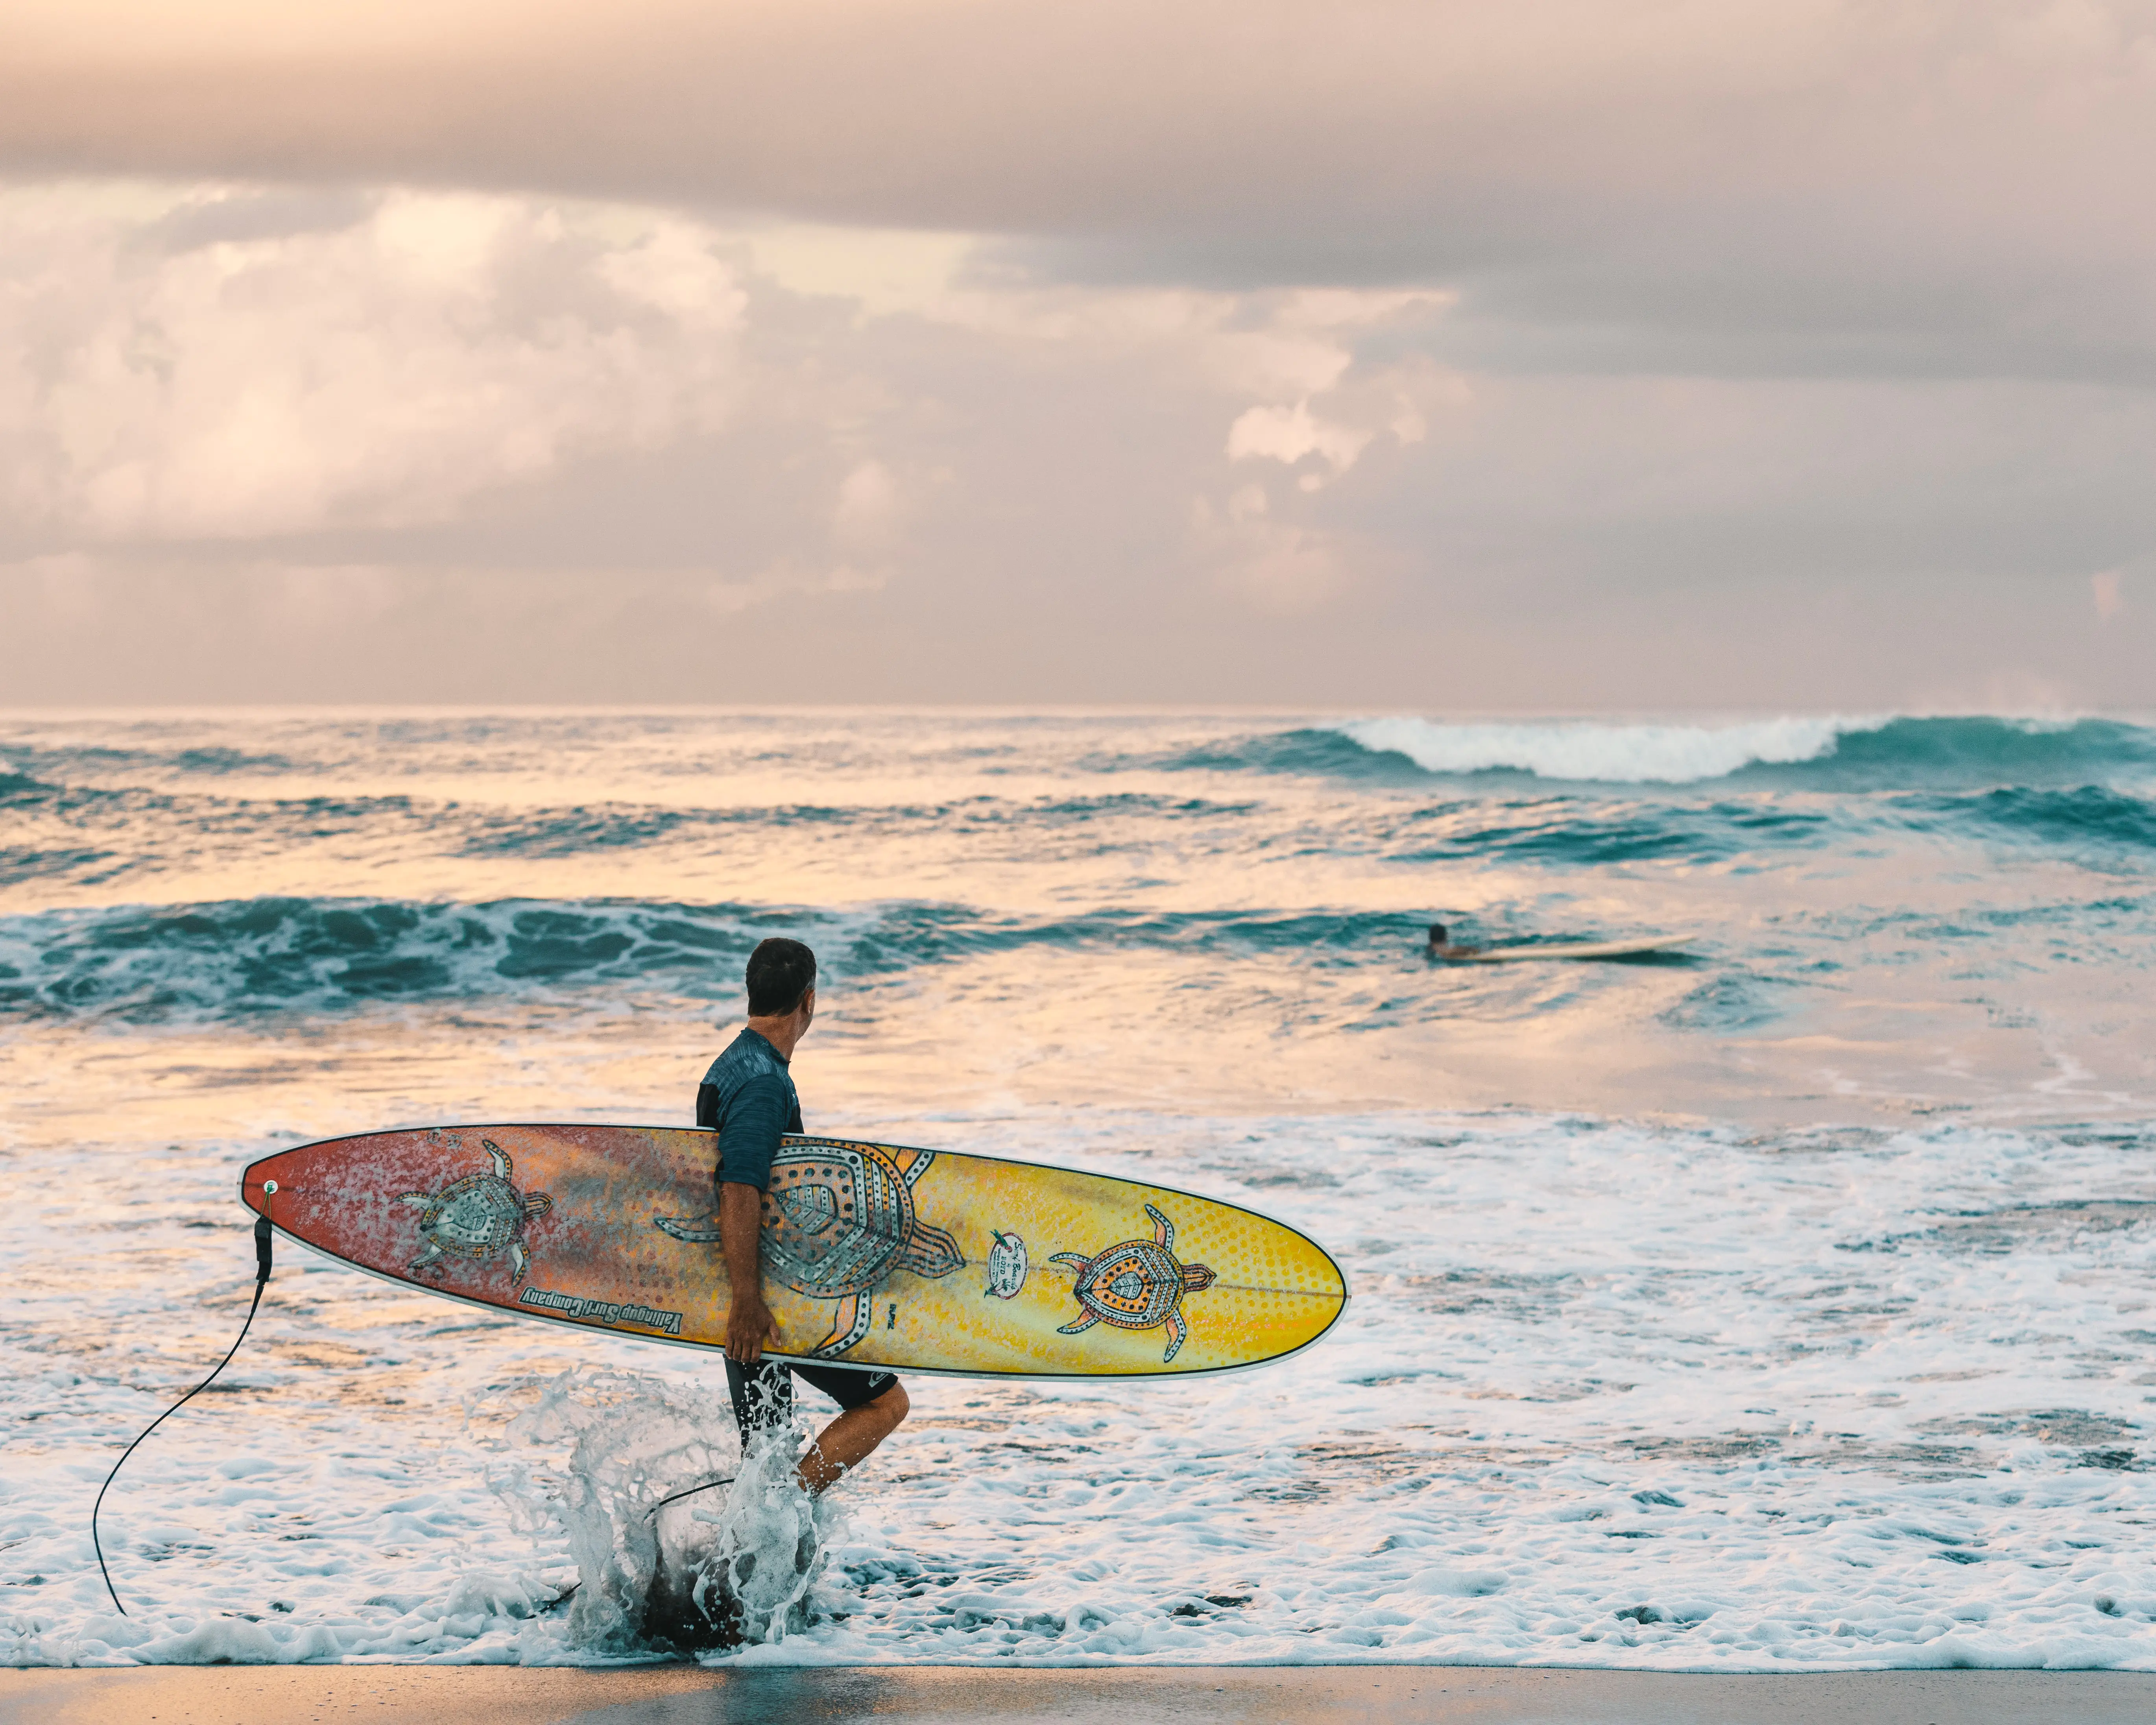 Things do in Bali: Surf!